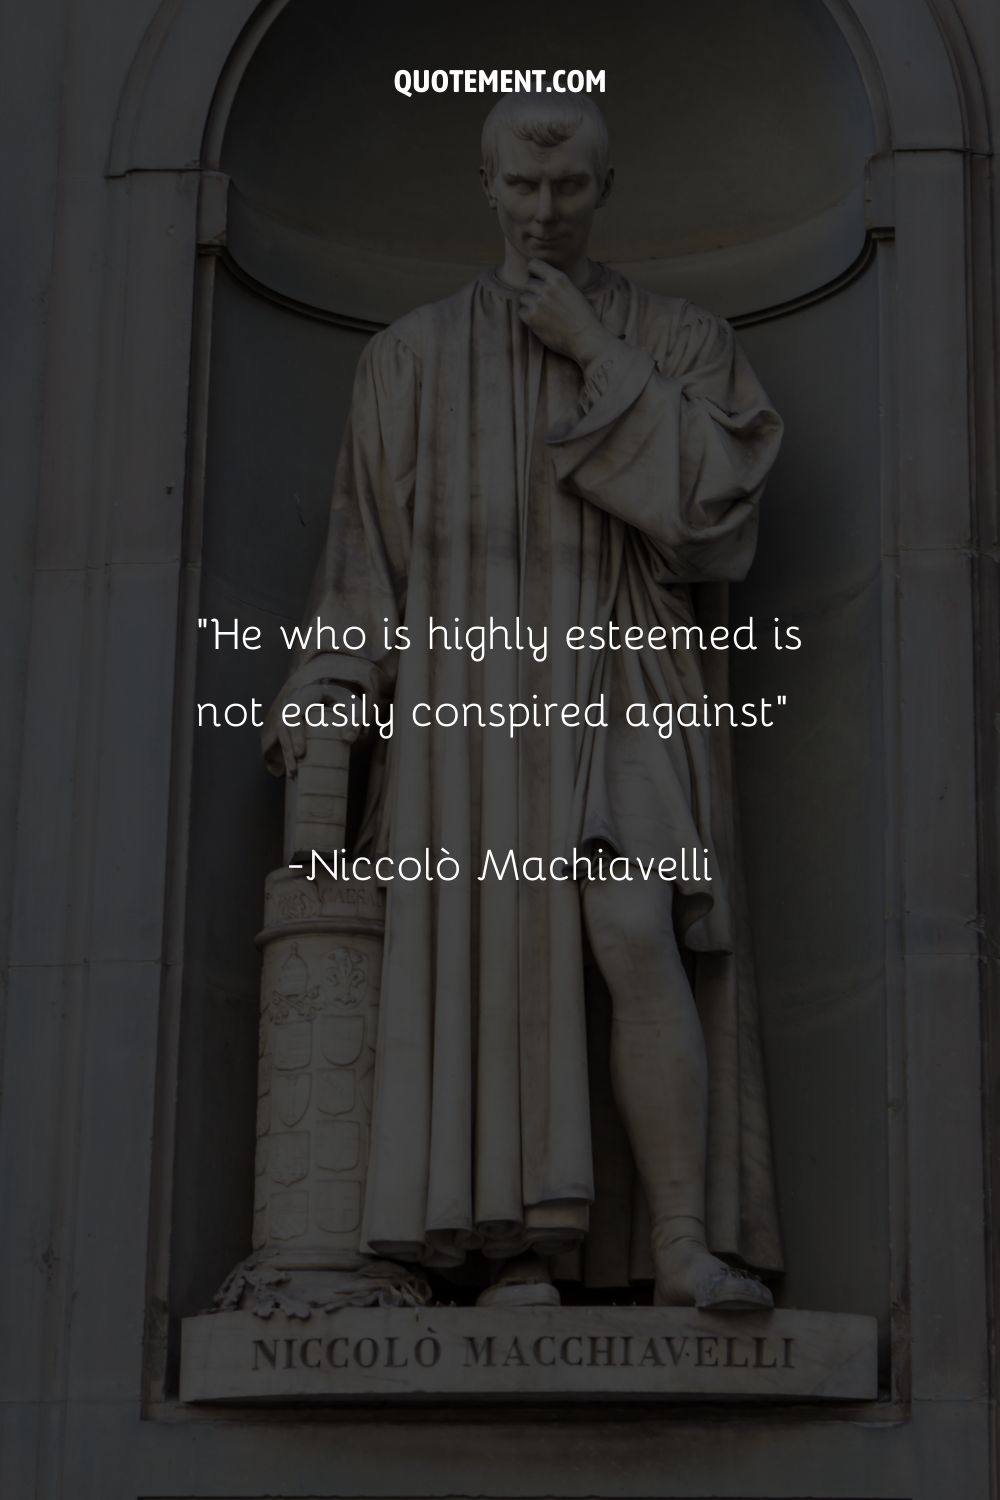 He who is highly esteemed is not easily conspired against